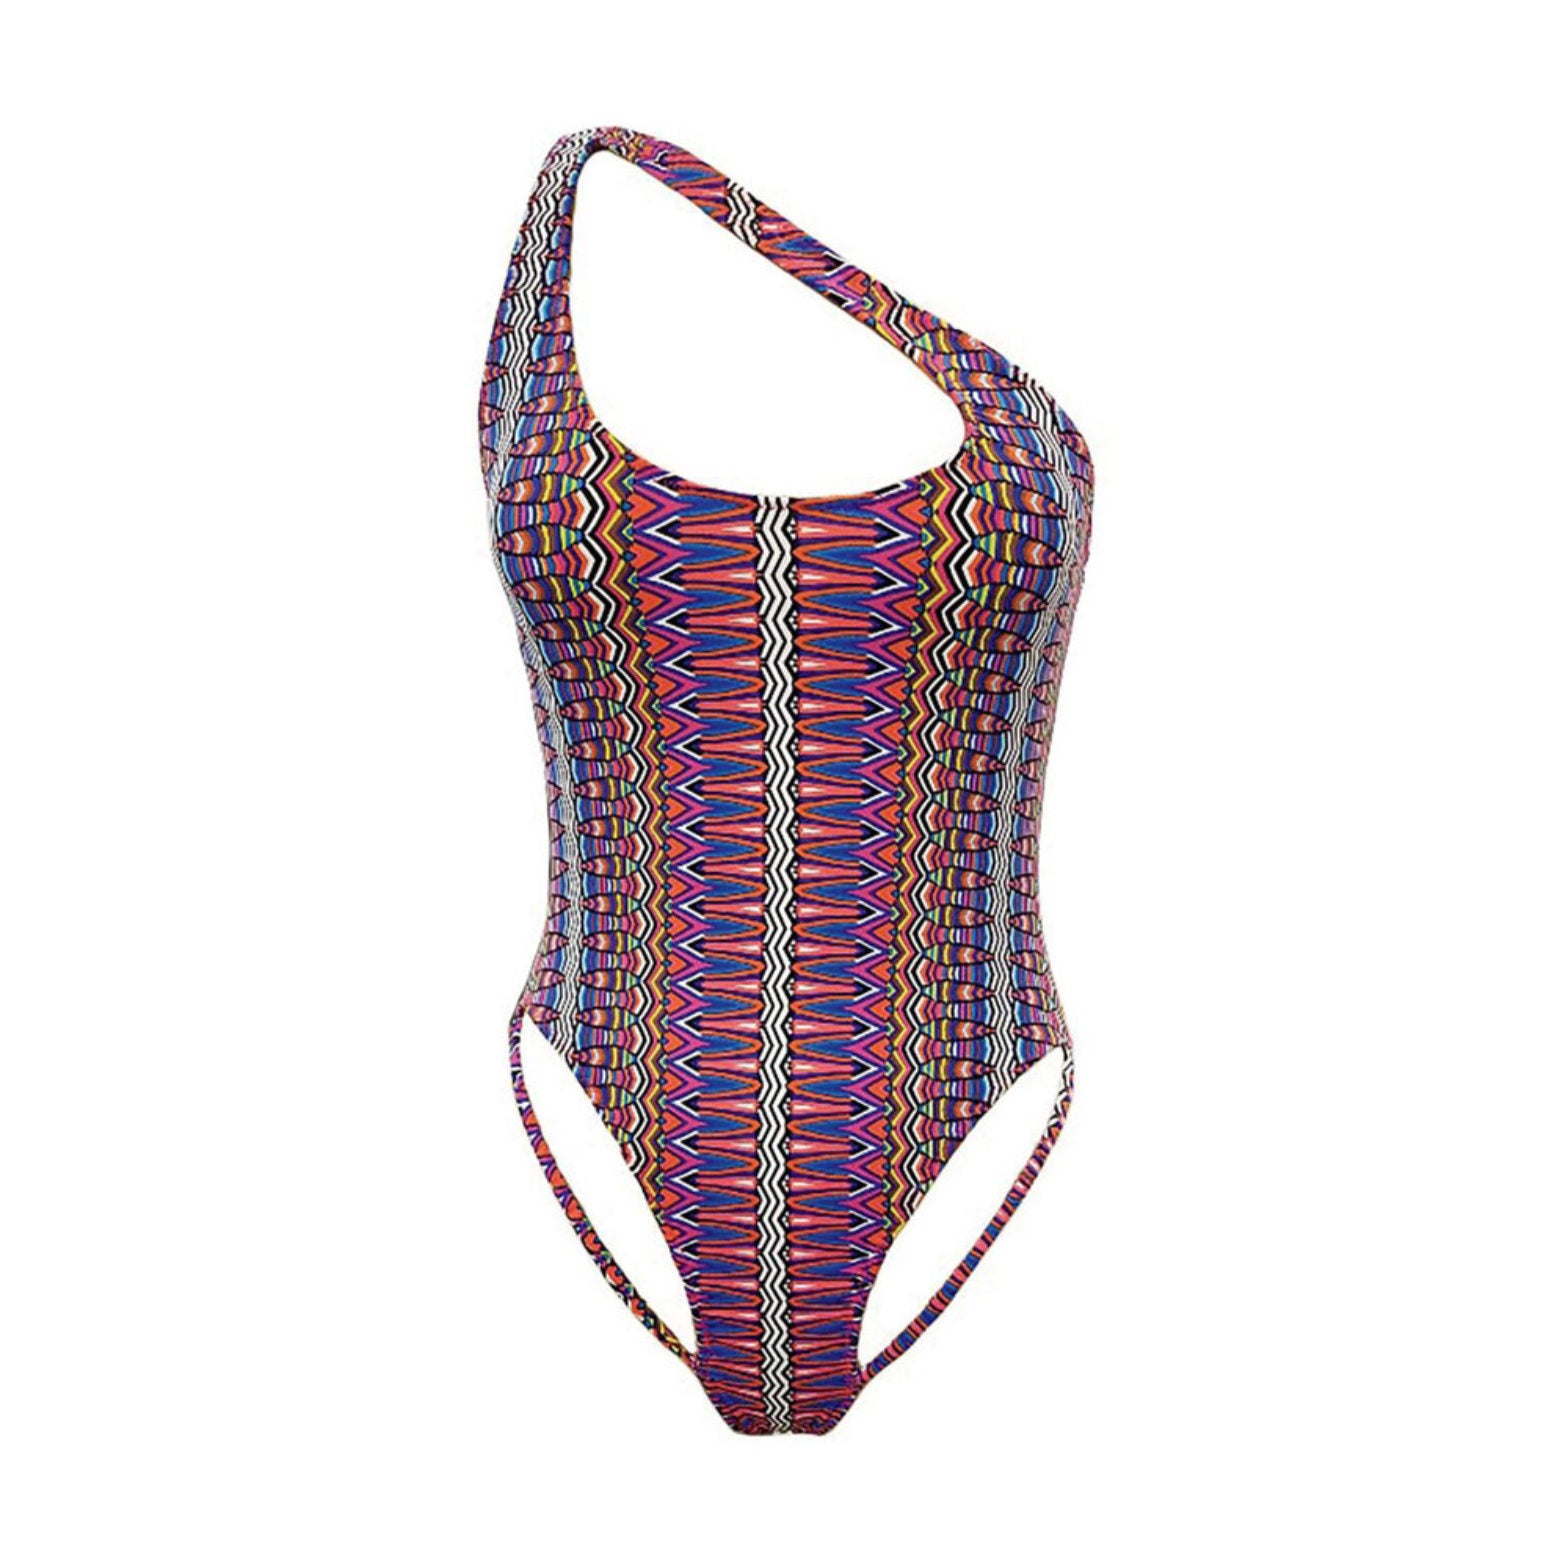 Make A Splash This Summer In These Standout Swimsuits | Essence